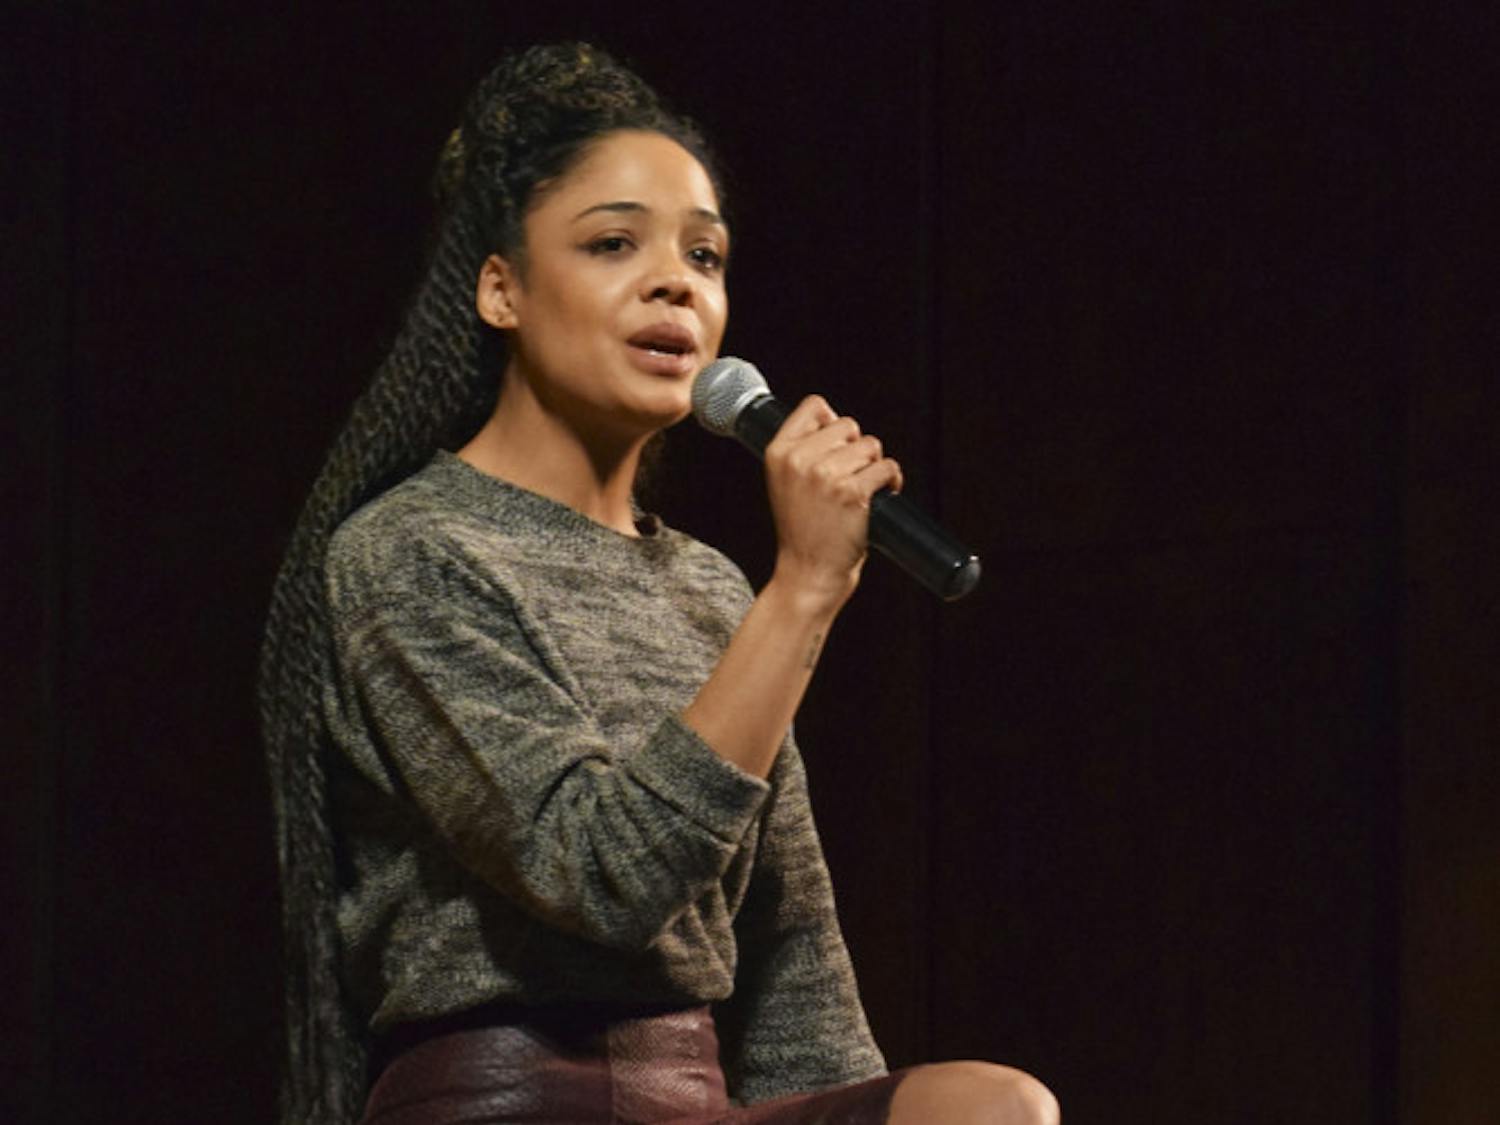 Tessa Thompson, keynote speaker for the 2015 Martin Luther King Jr. celebration events, takes questions from the audience at the University Auditorium on Wednesday night. Thompson is an American actress known for her most recent role in “Selma.”